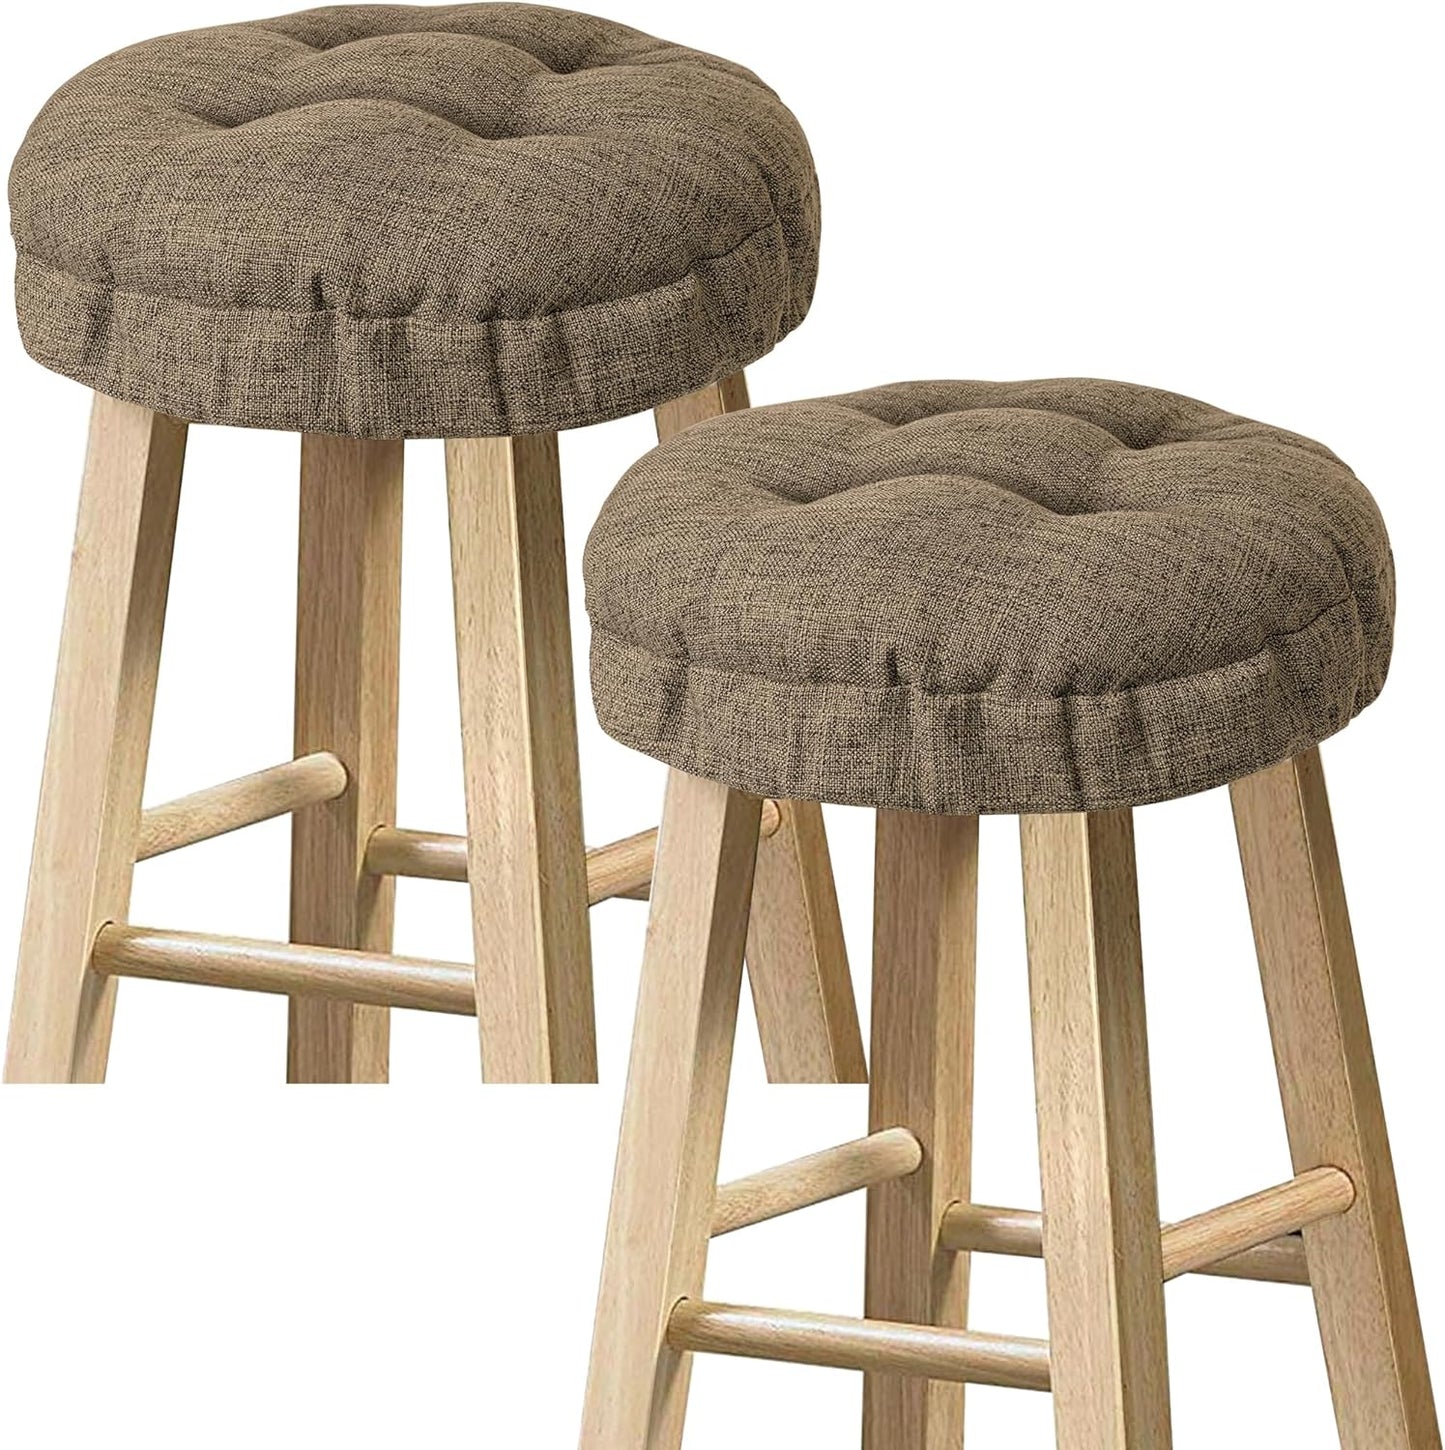 Sunlit Bar Stool Covers - Set of 2 Round Bar Stool Seat Covers, Soft and Cushioned Bar Chair Covers, Easy to Install and Wash, Cover Only, 14 Inch Diameter, Gray